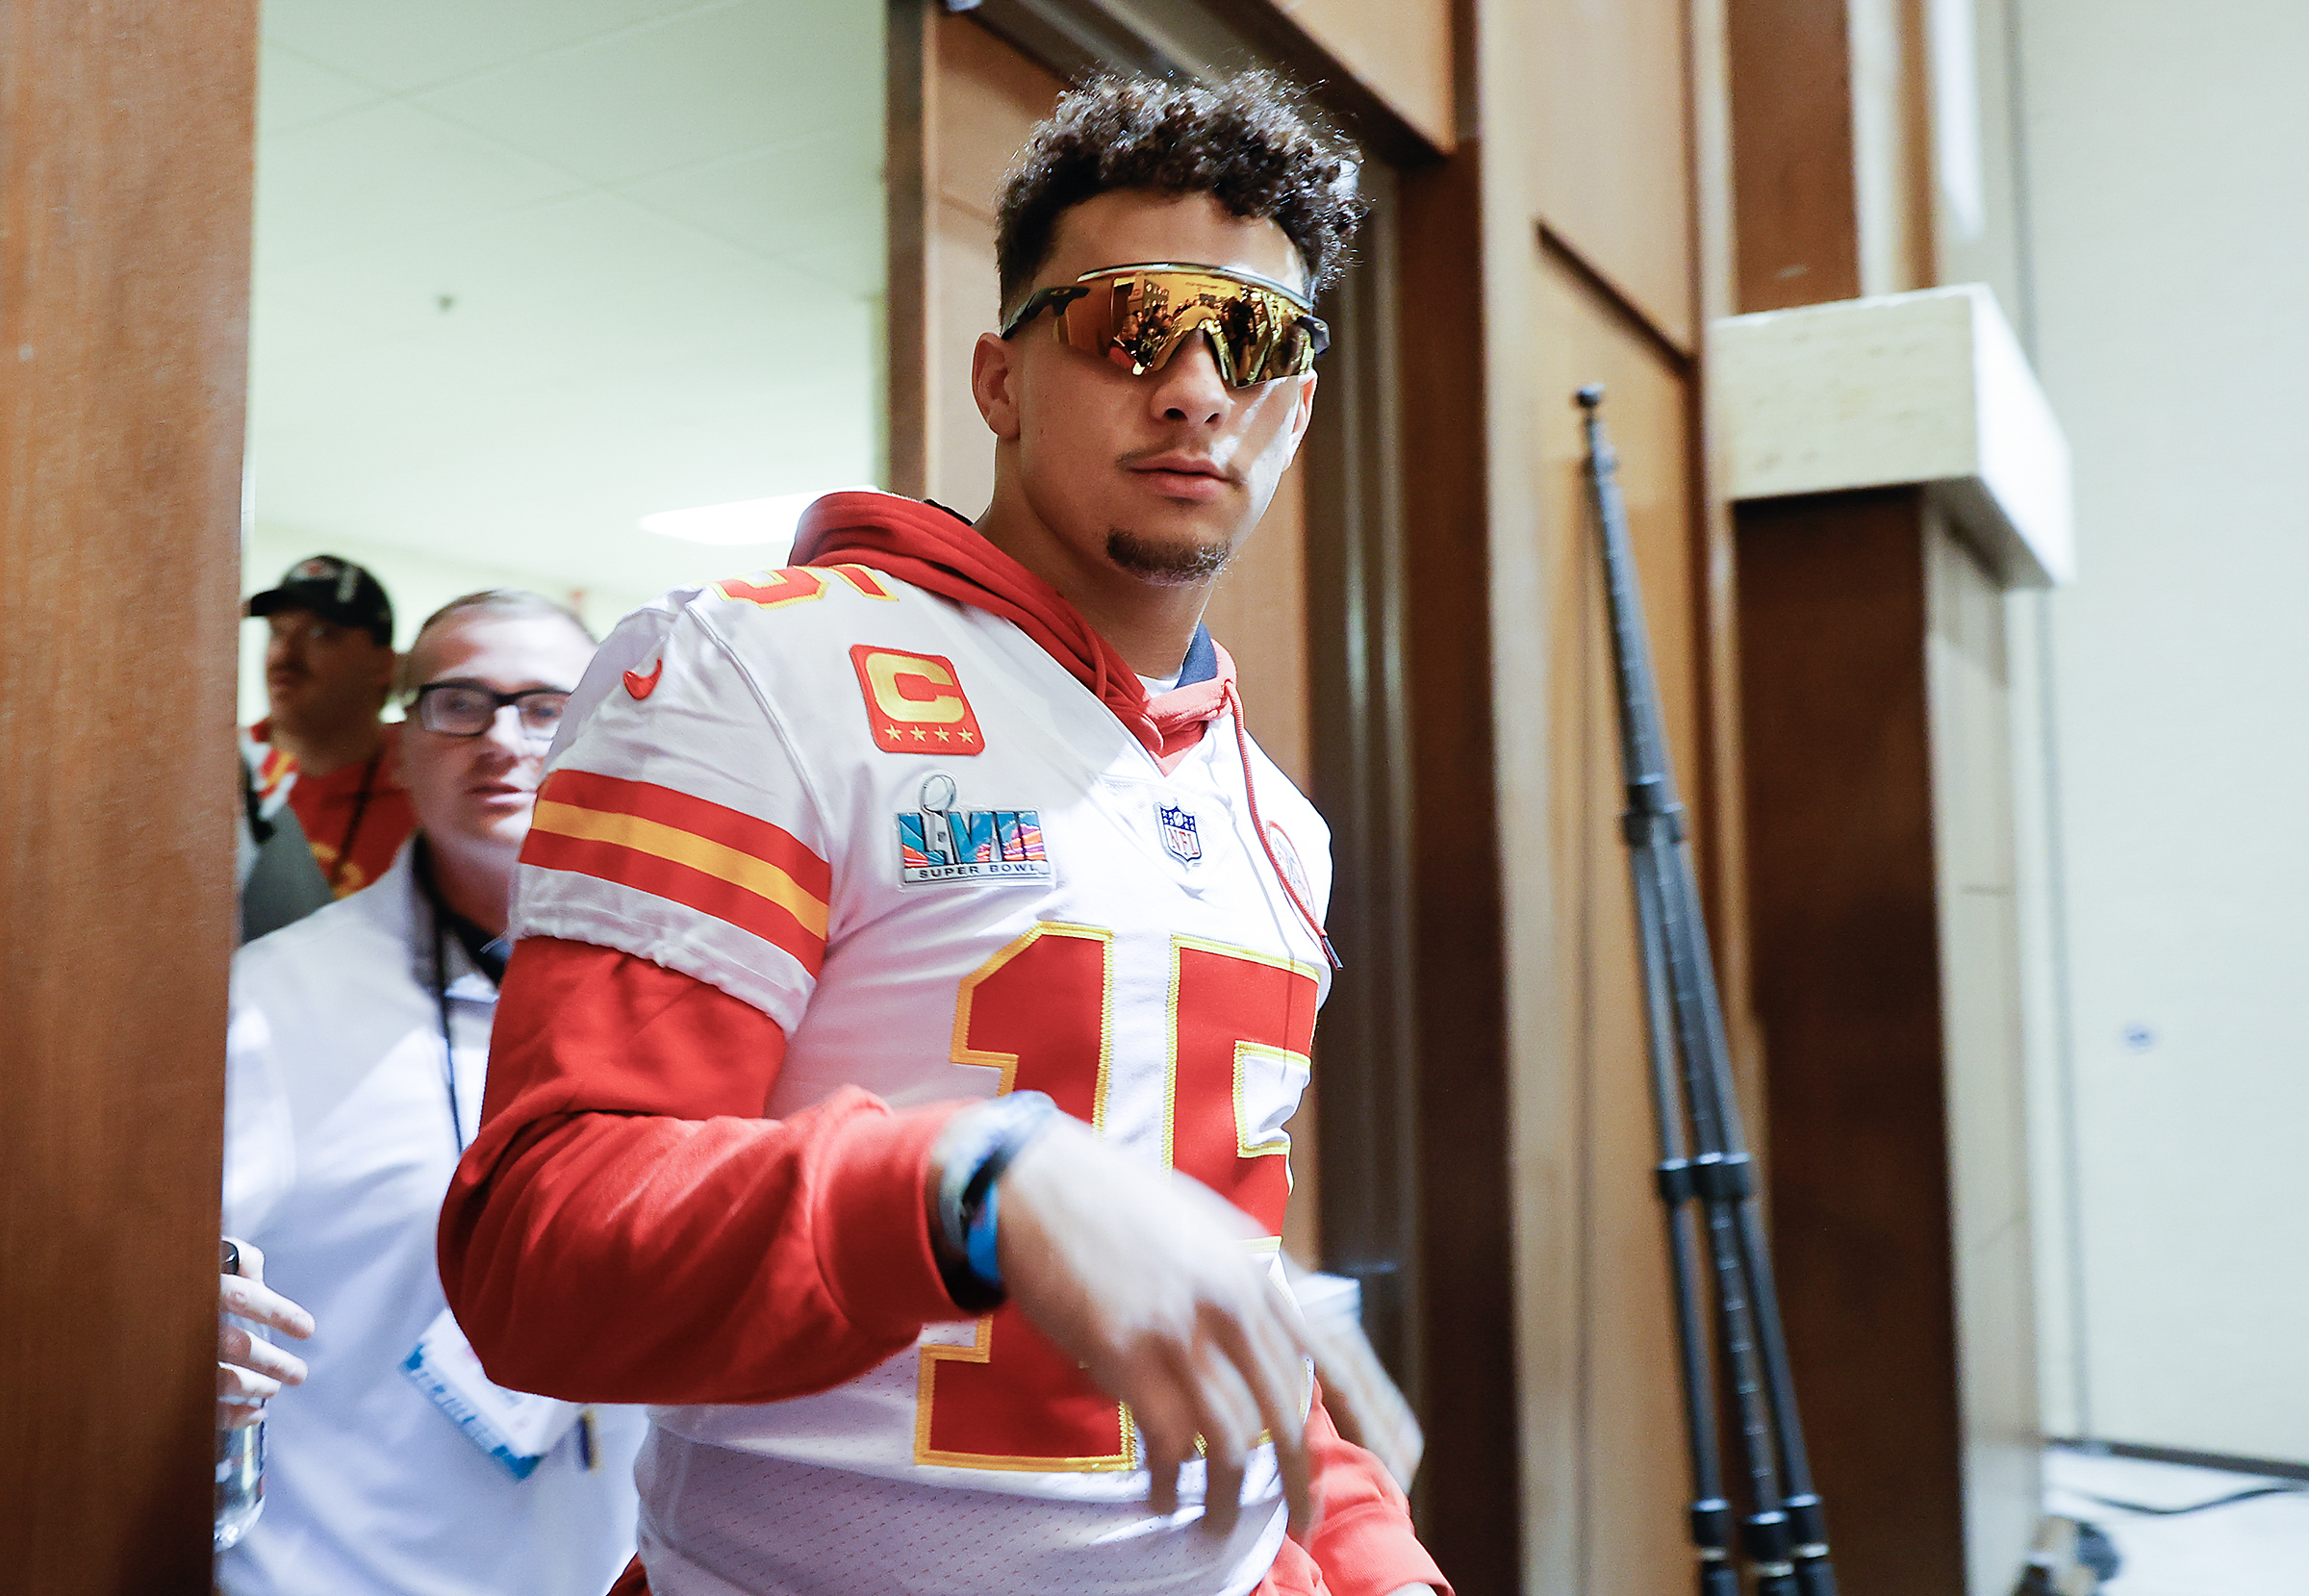 Patrick Mahomes after the game  I thought it was a cool thing to